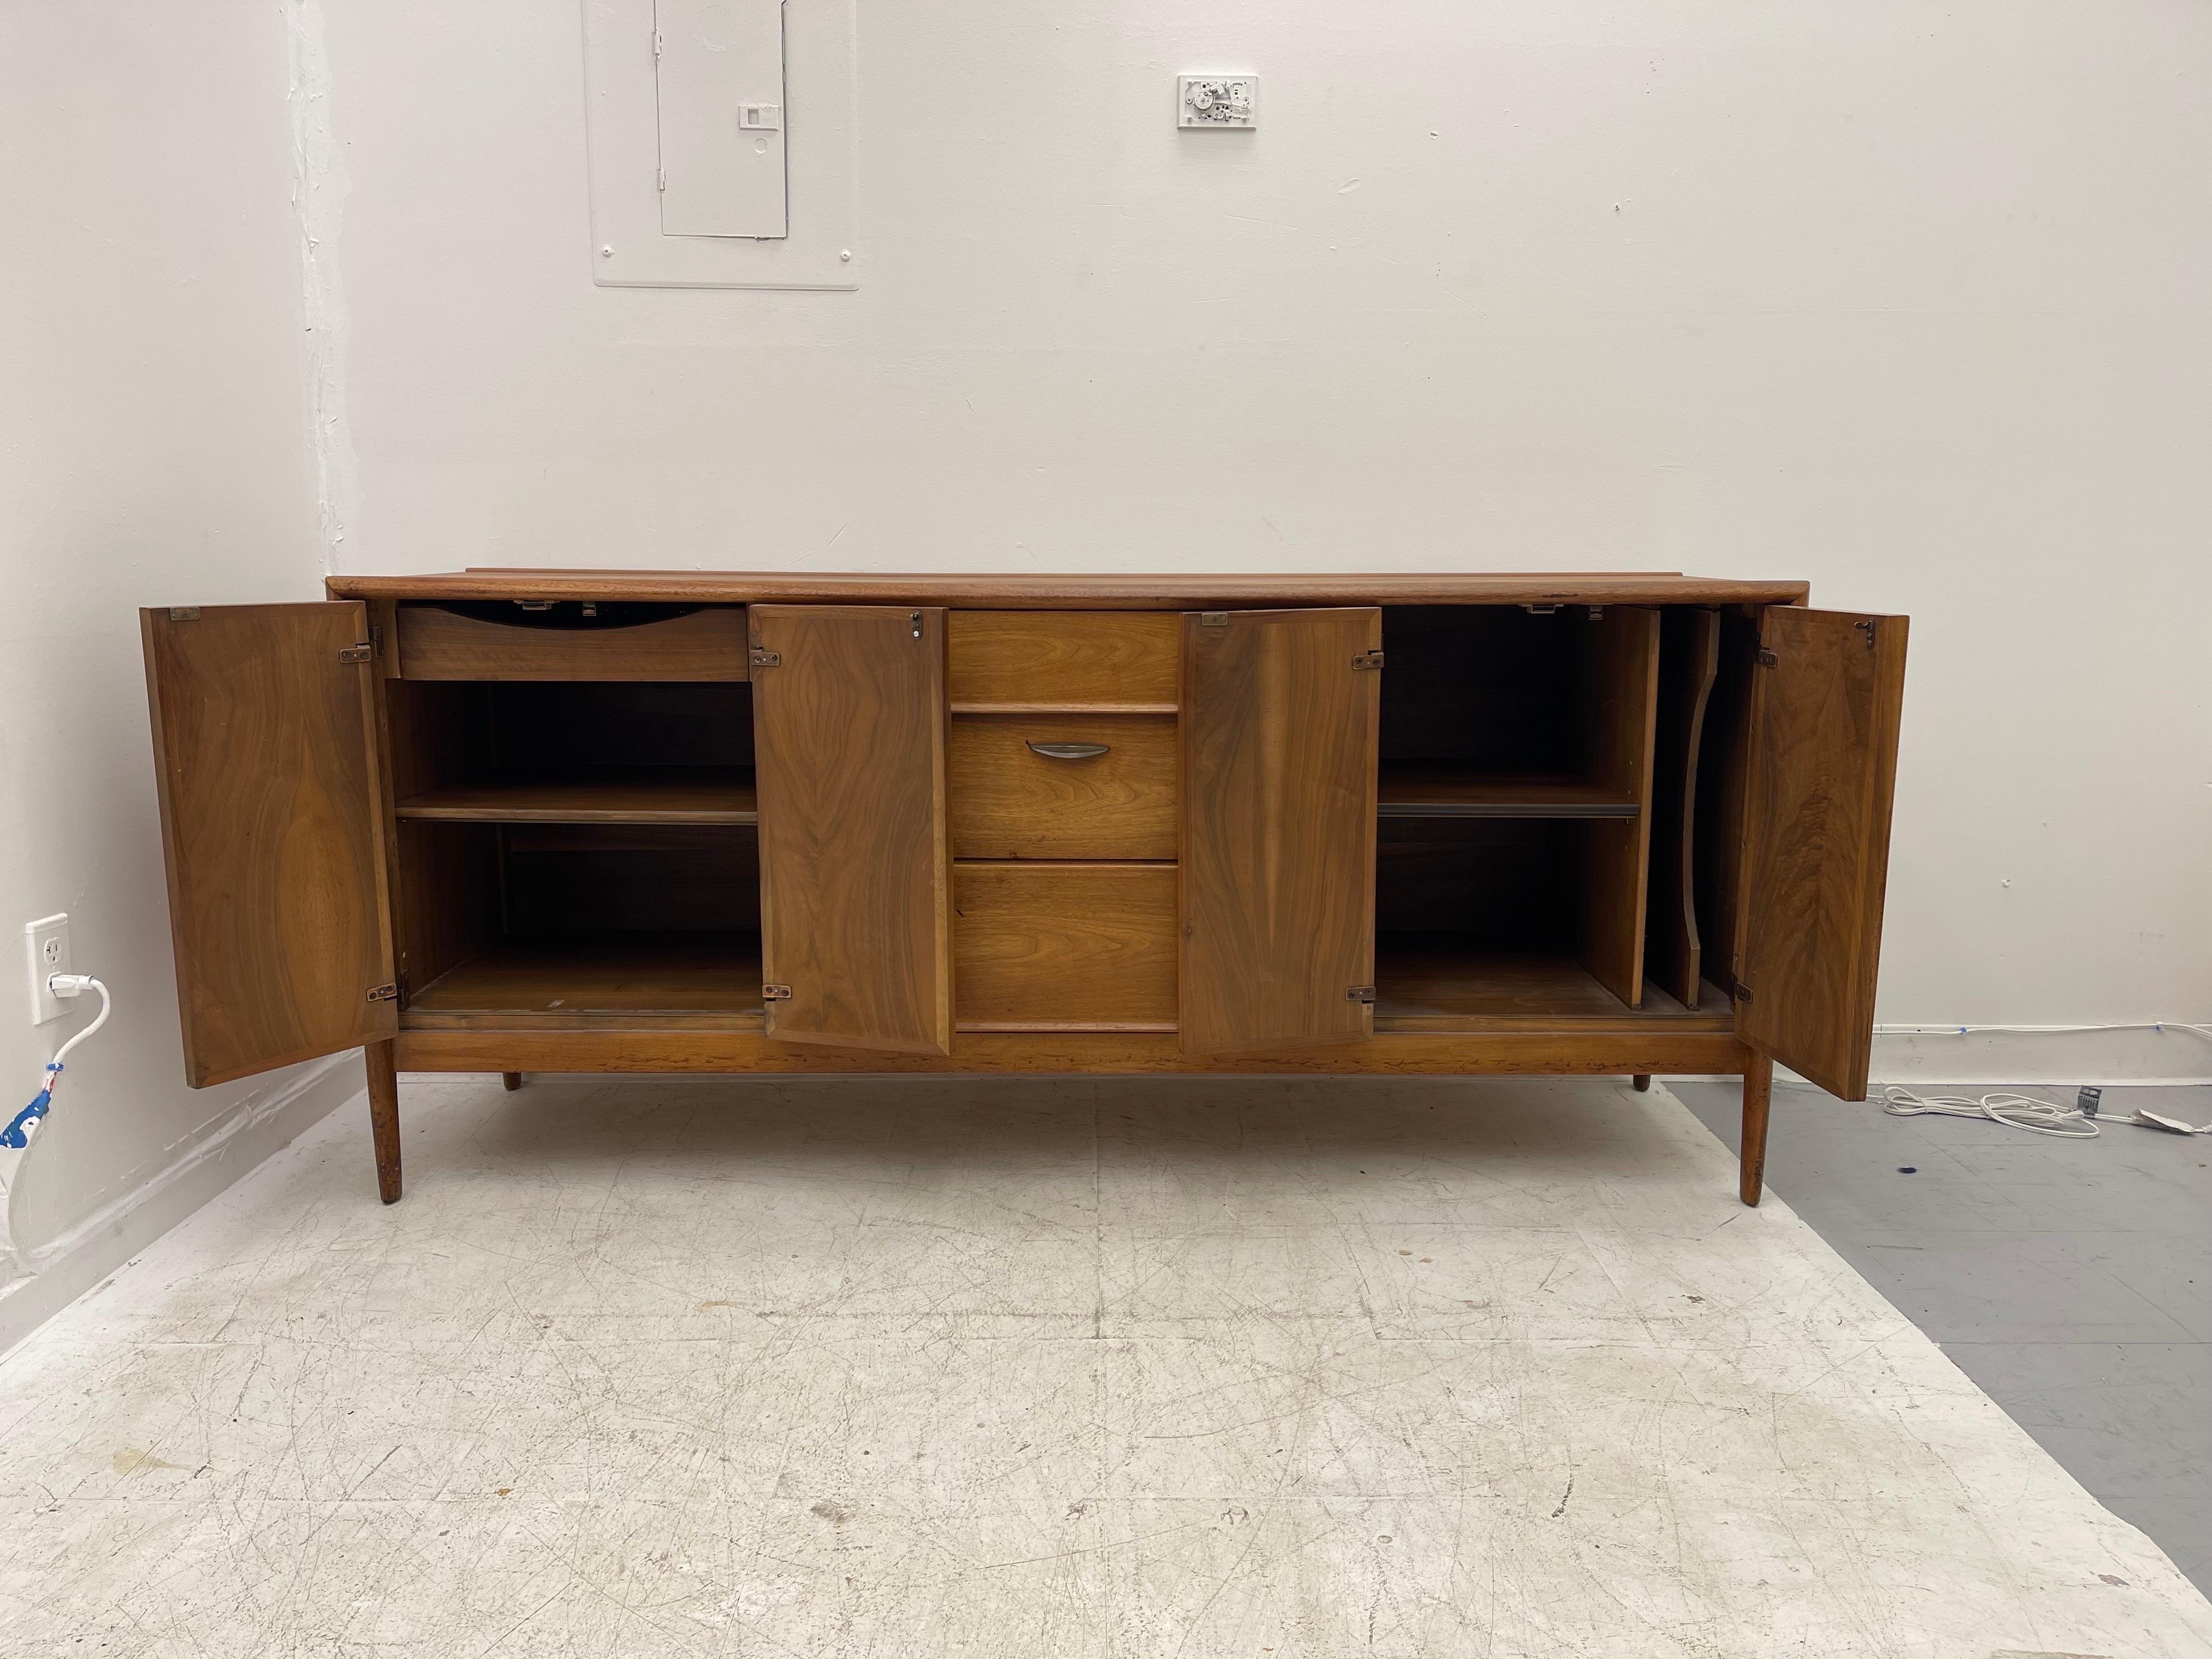 Late 20th Century 1970s Solid Walnut Mid Century Modern Credenza by Drexel